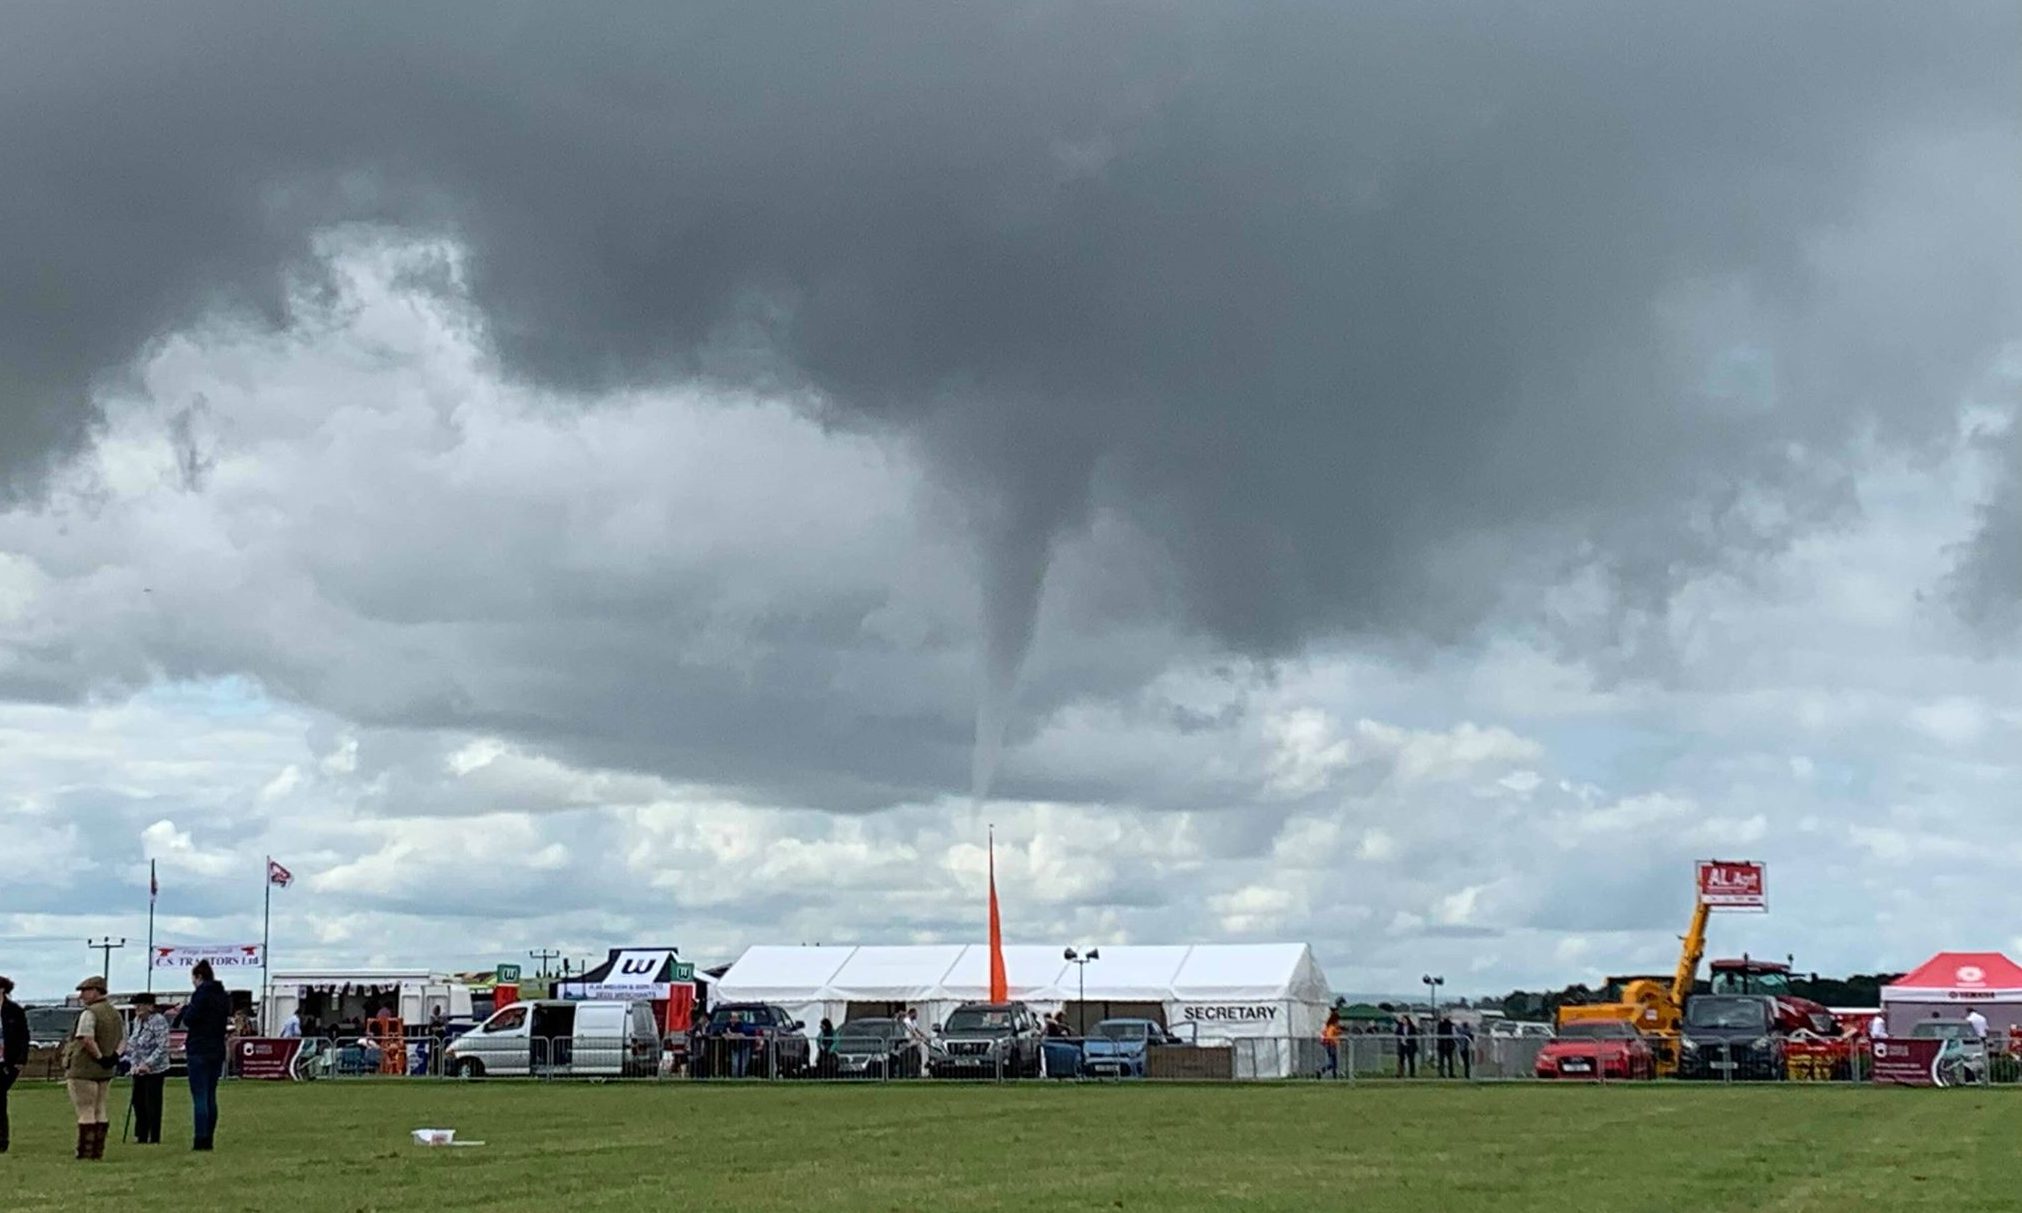 Karrena Kerr was watching events at Kirrie show when the waterspout appeared.